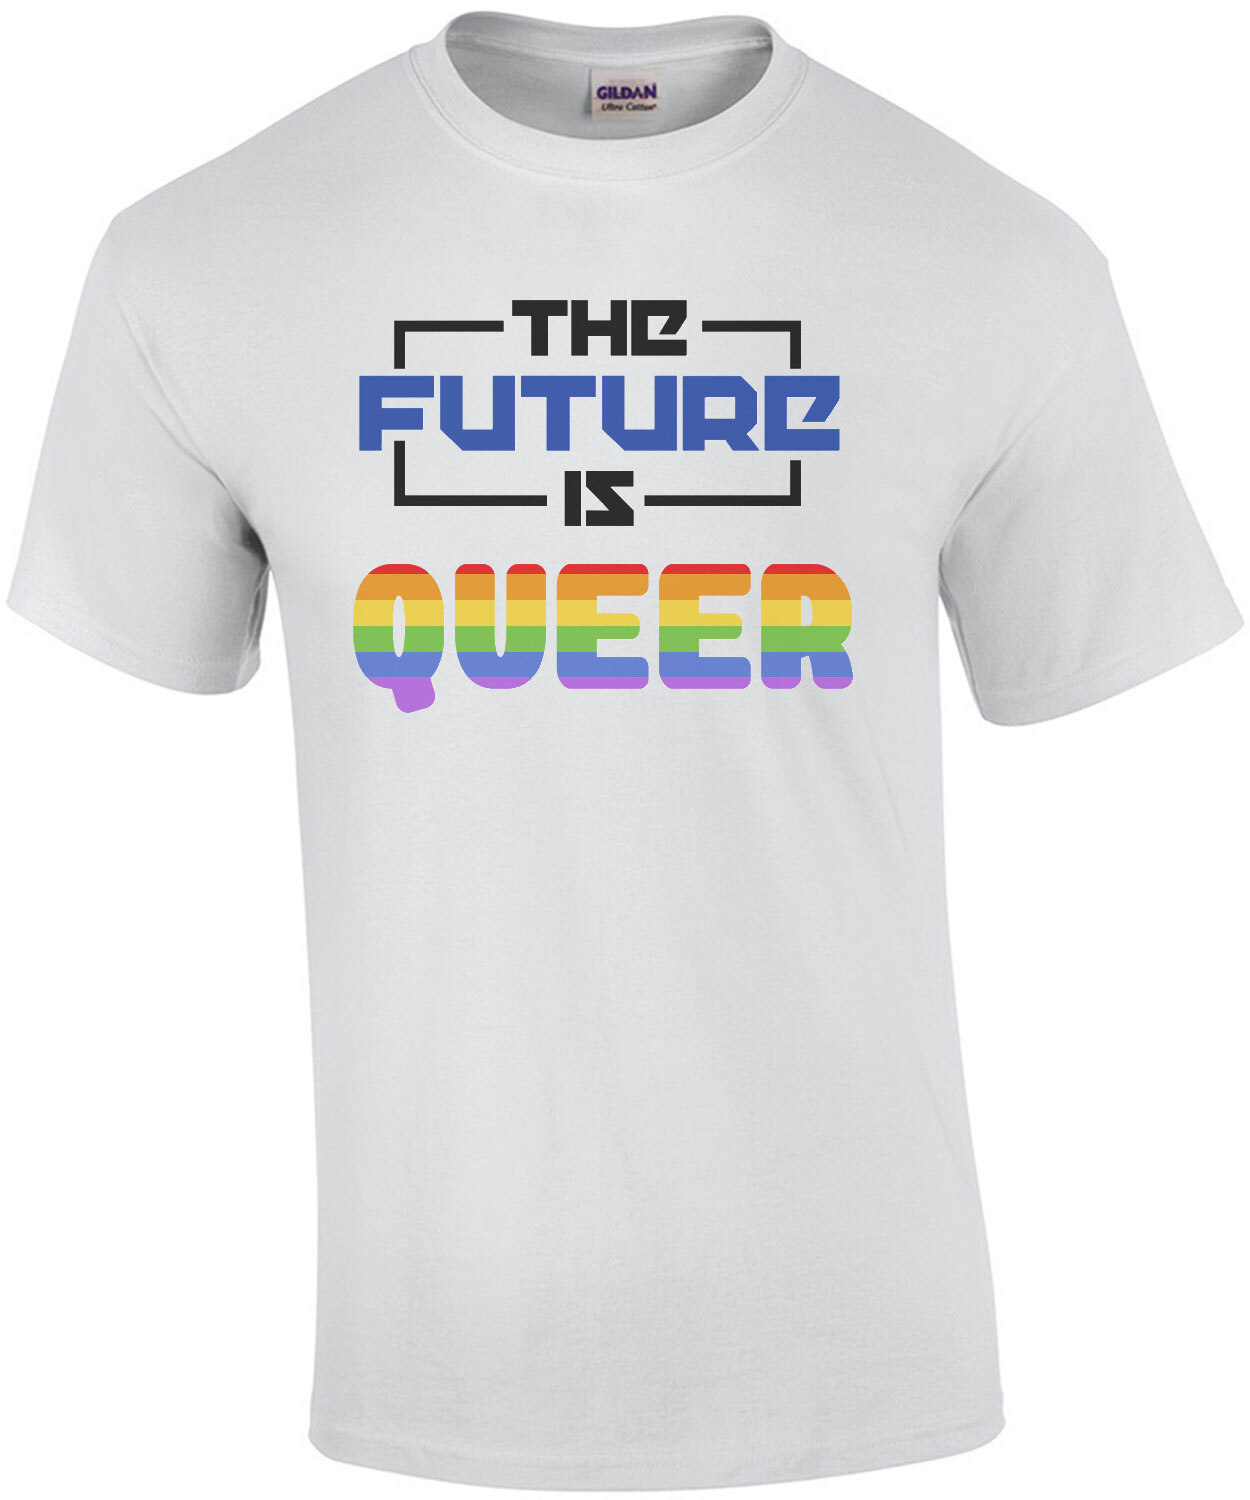 The future is queer - funny gay pride t-shirt / LGBTQ T-Shirt